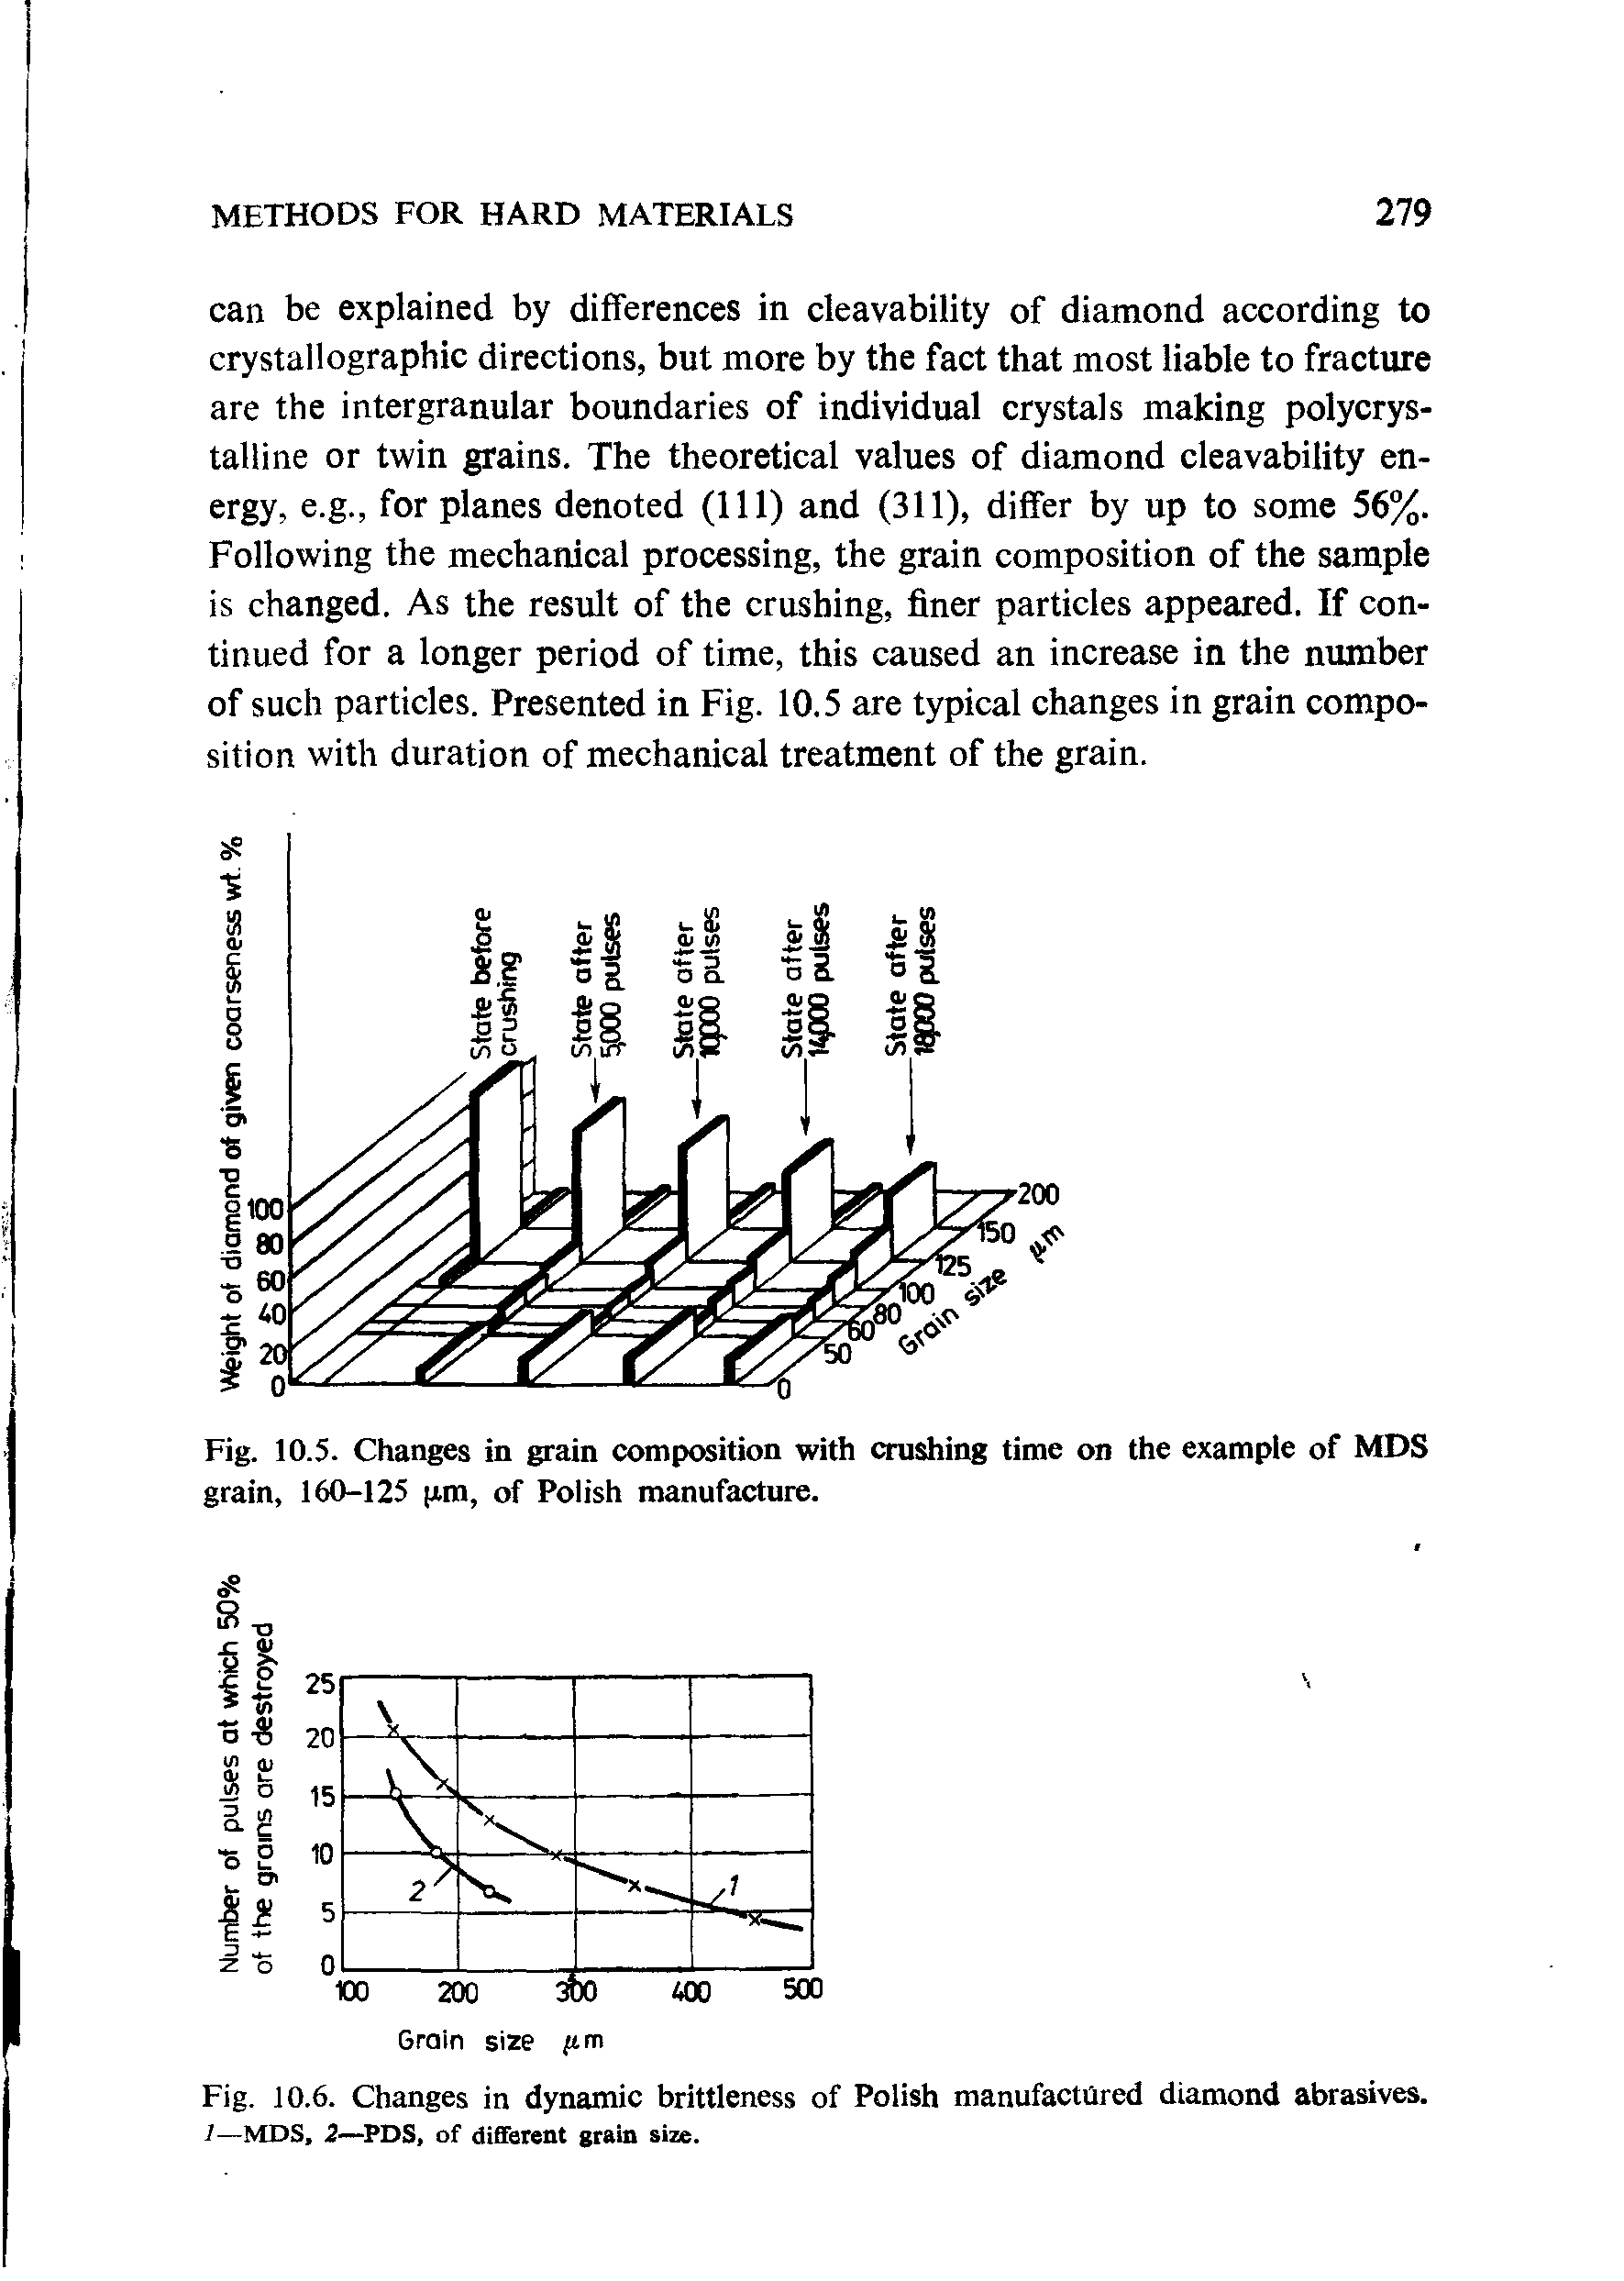 Fig. 10.5. Changes in grain composition with crushing time on the example of MDS grain, 160-125 pm, of Polish manufacture.